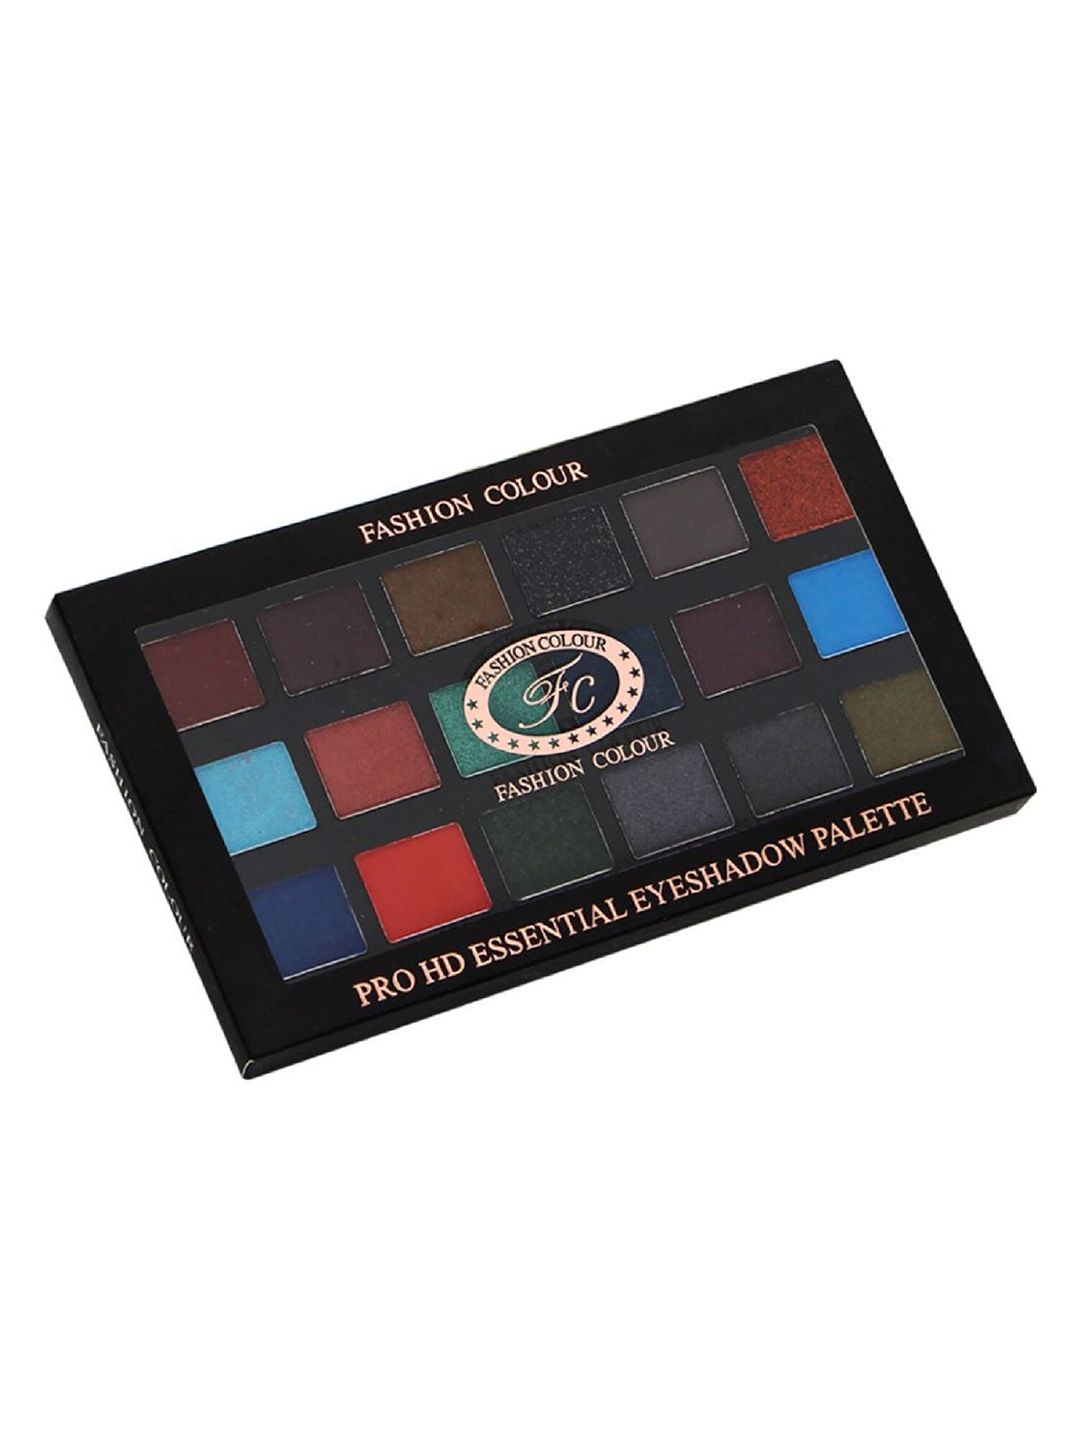 Fashion Colour Pro HD 18 Shades Essential Eyeshadow Palette - Shade 02 Price in India